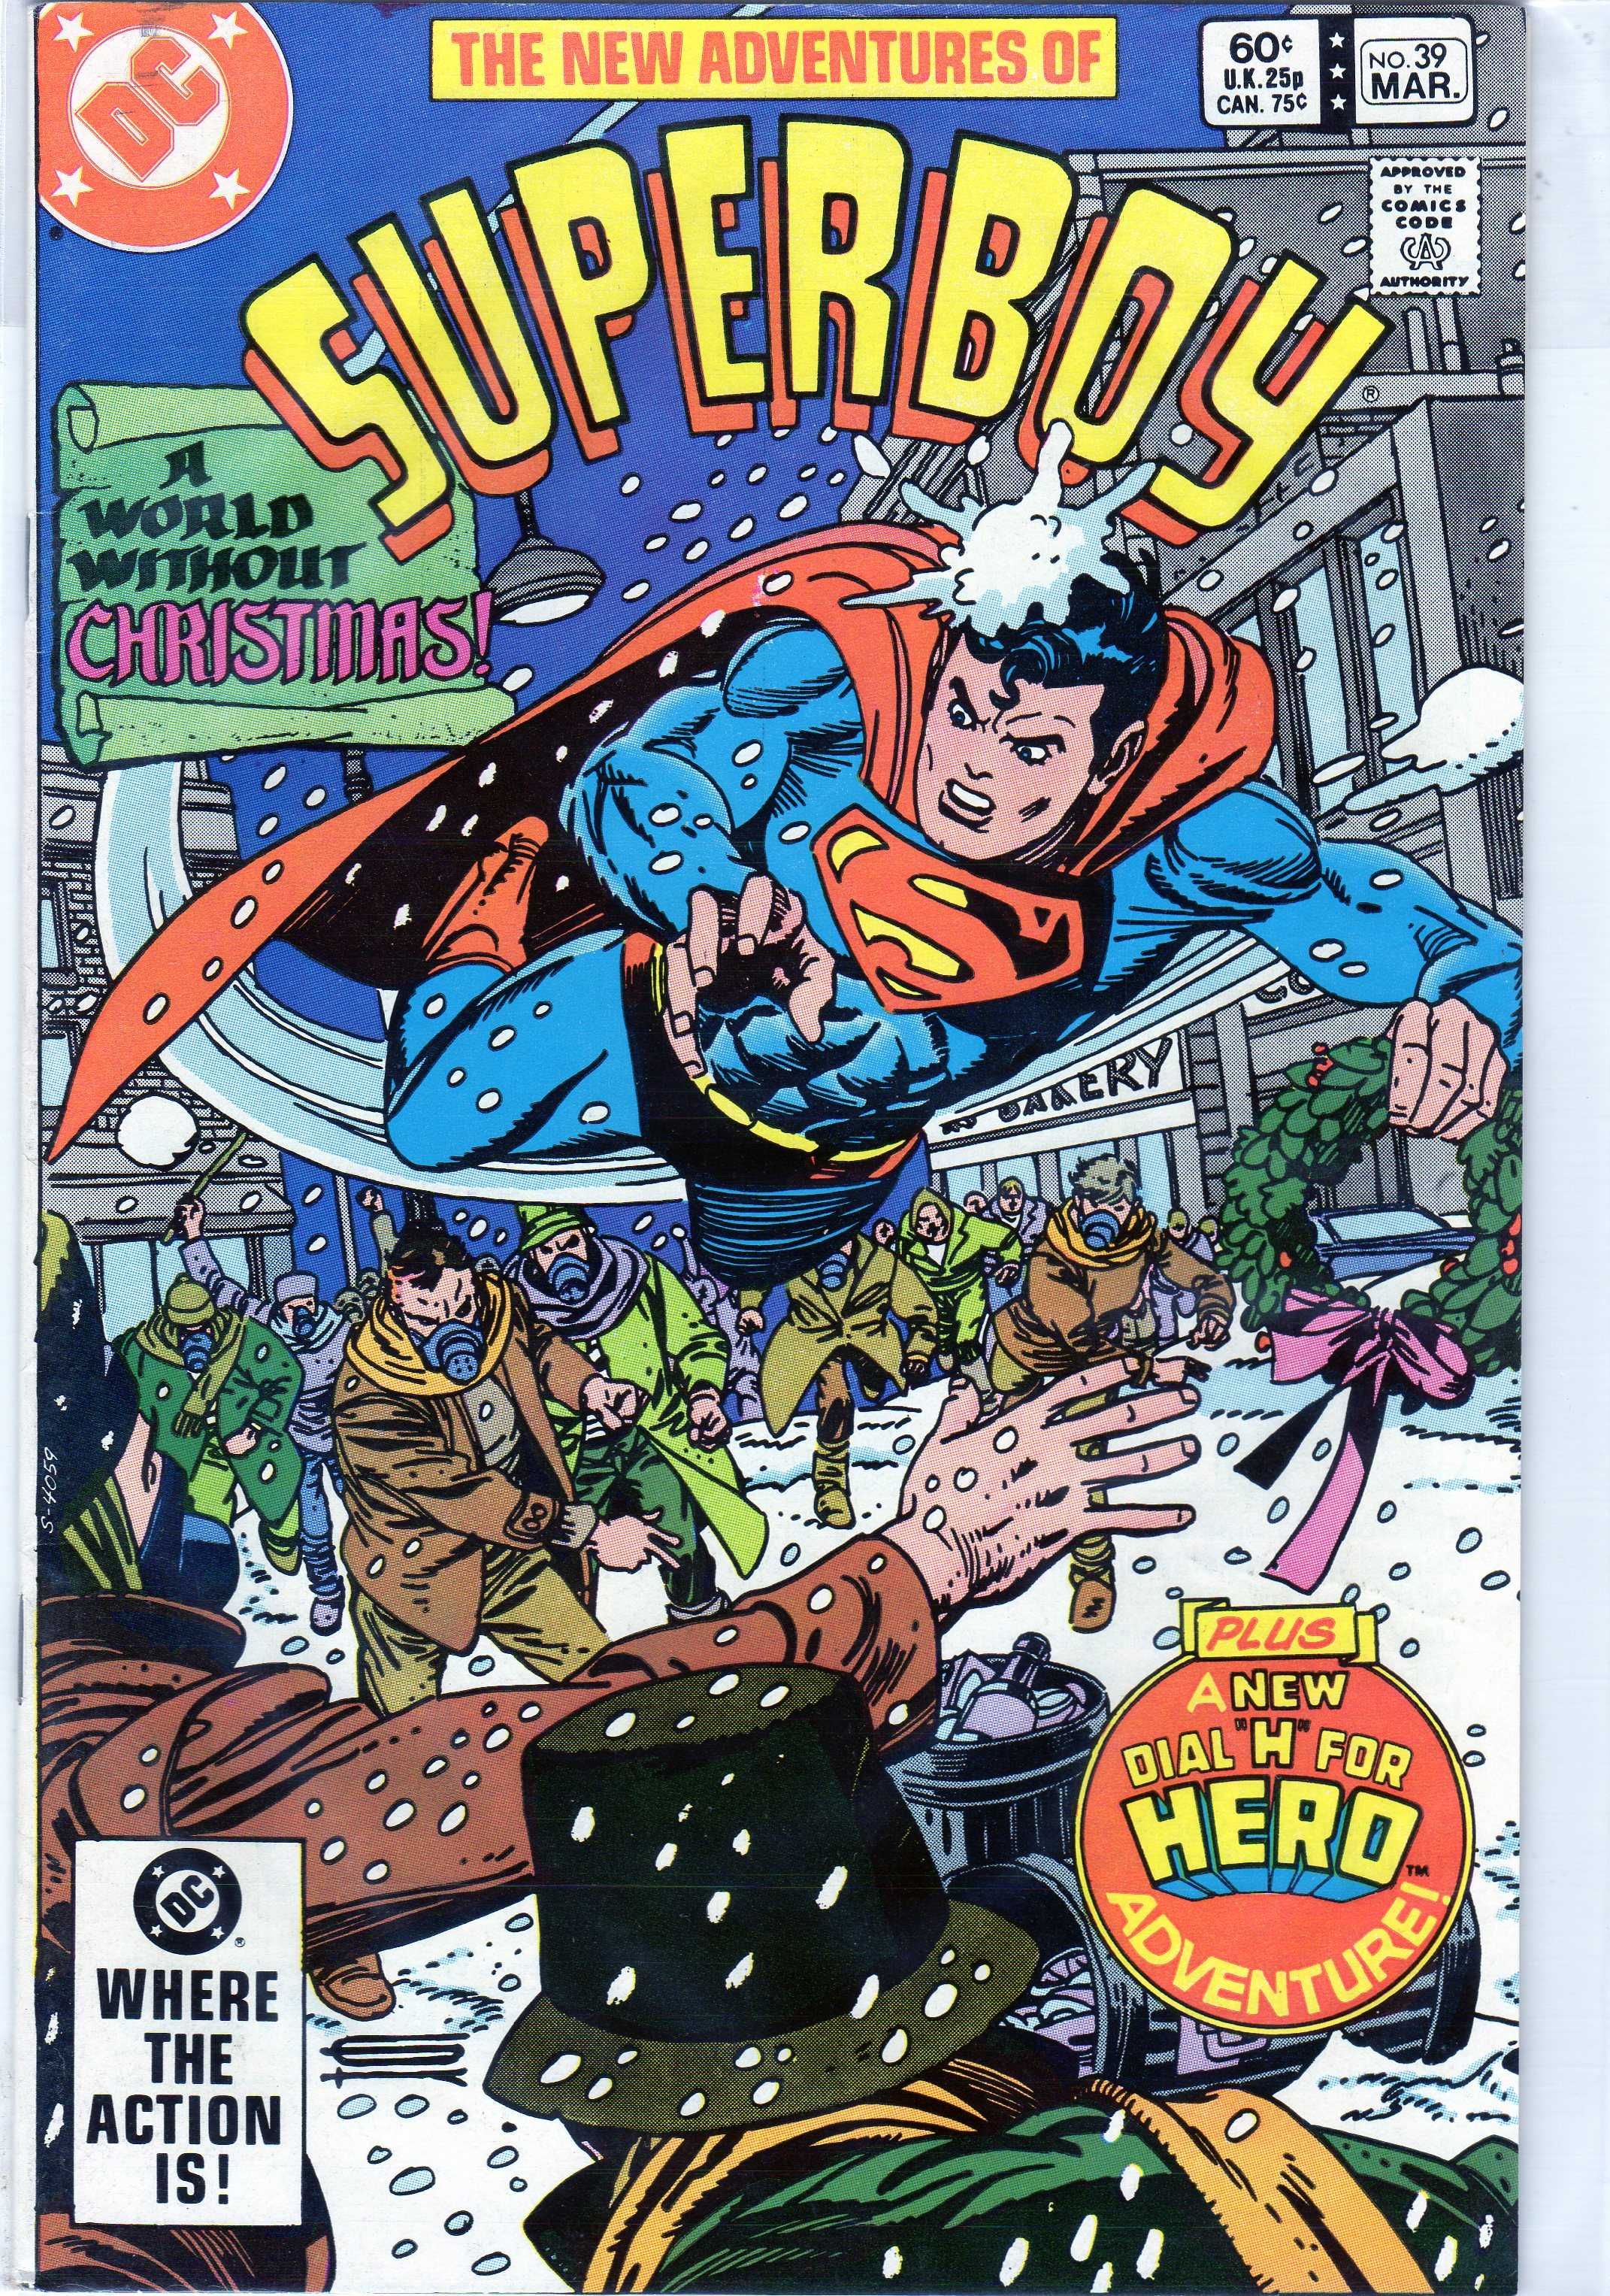 The New Adventures of Superboy # 39 DC Comics Modern Age